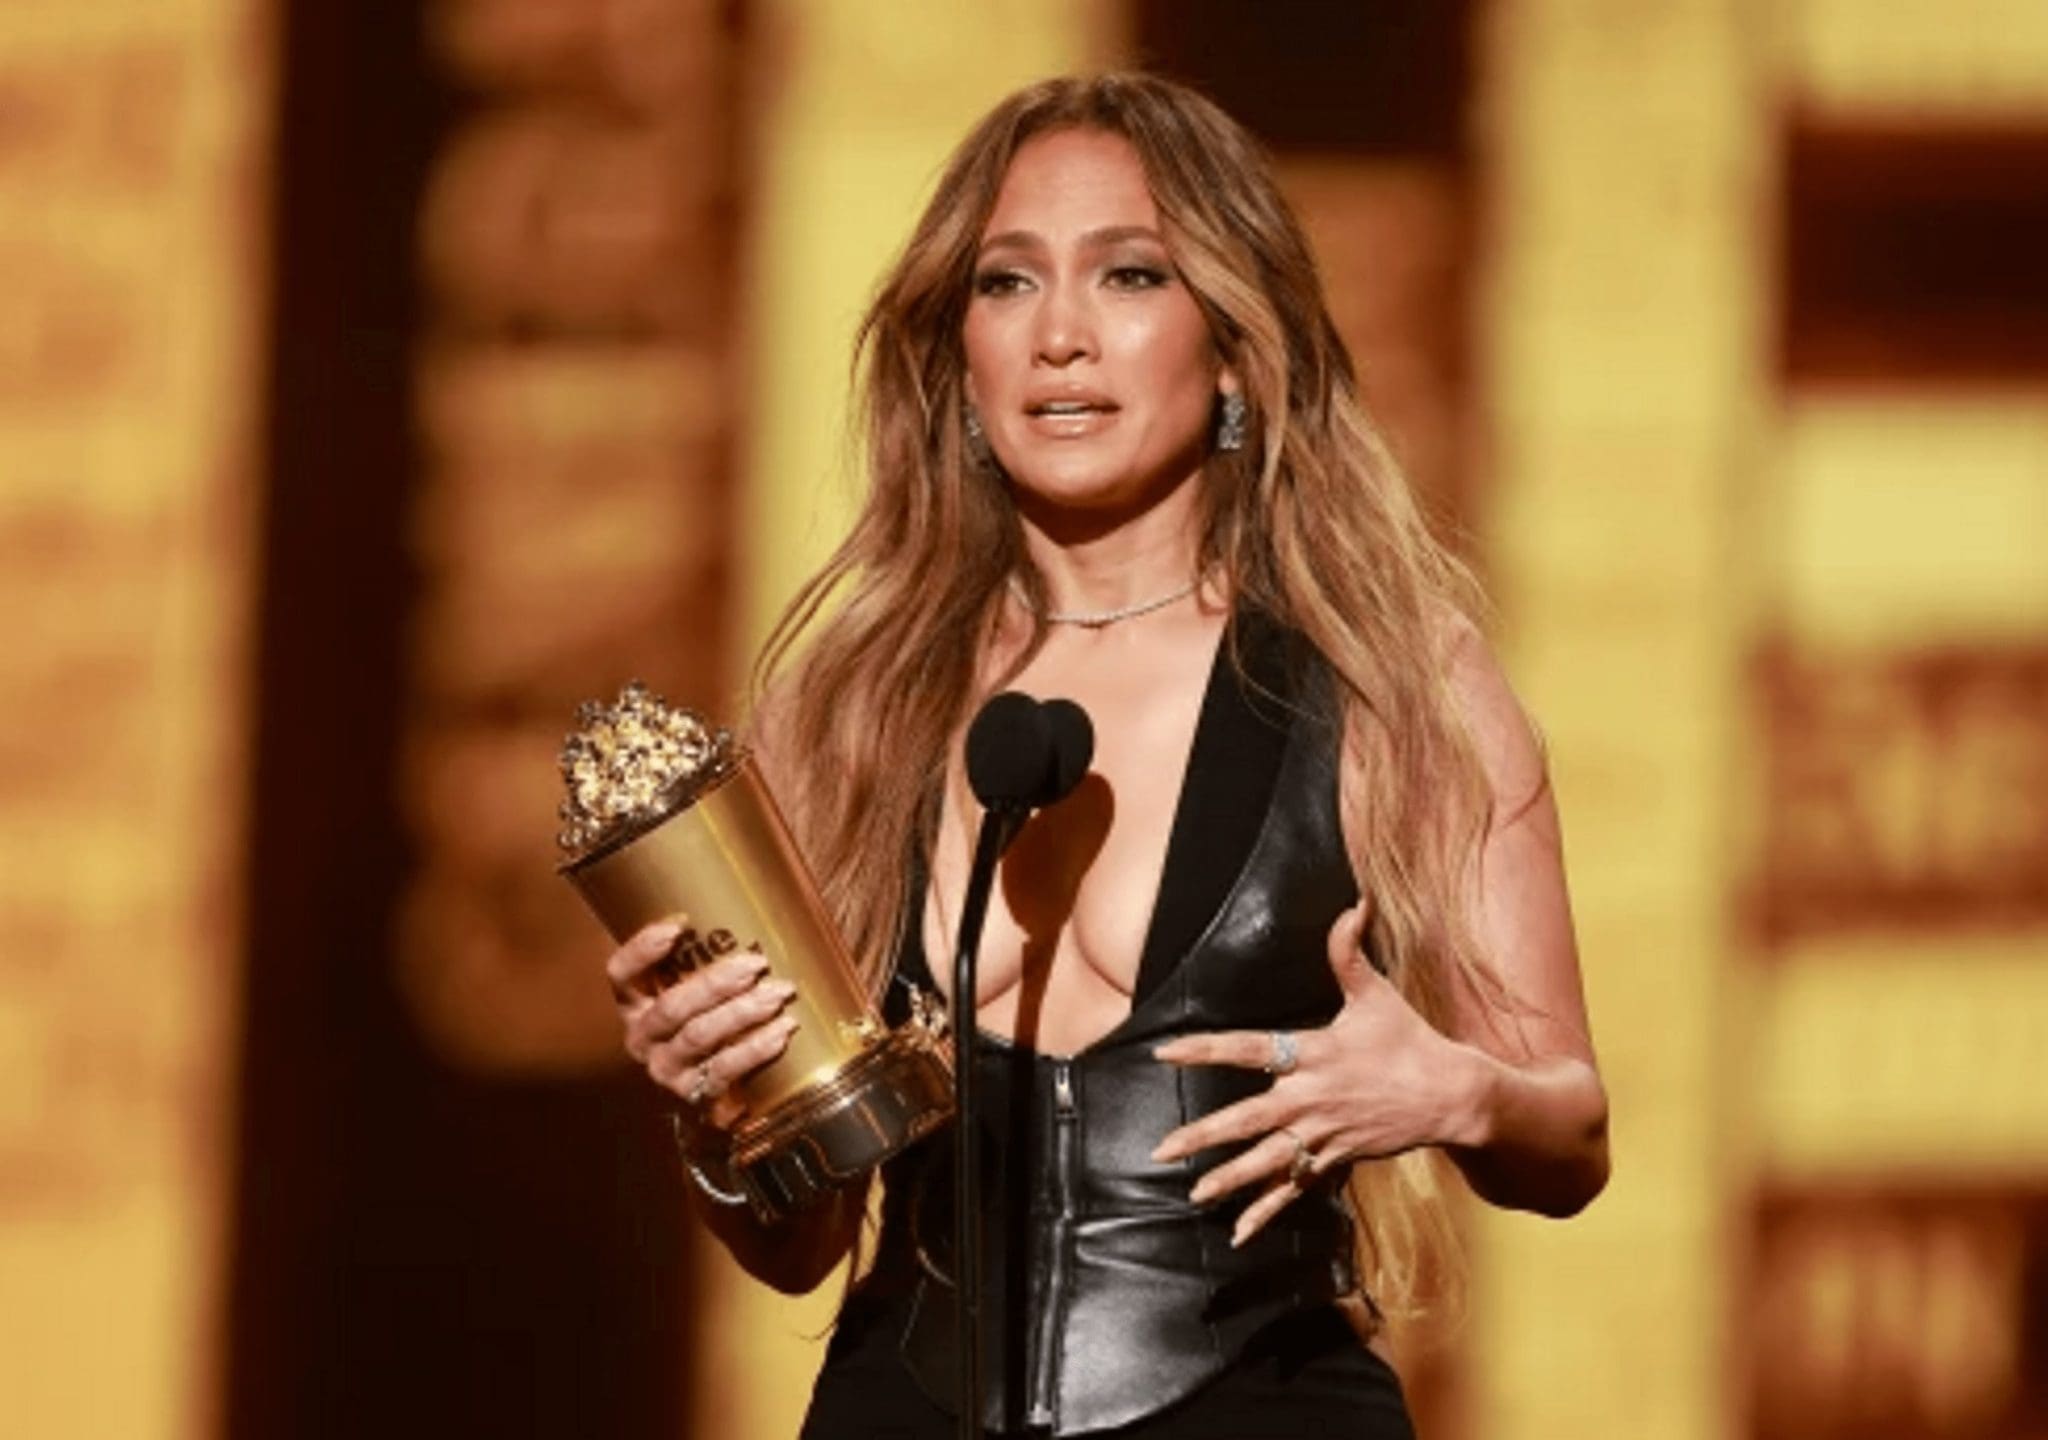 Jennifer Lopez, in a leather top with an impressive neckline, made a splash on the red carpet